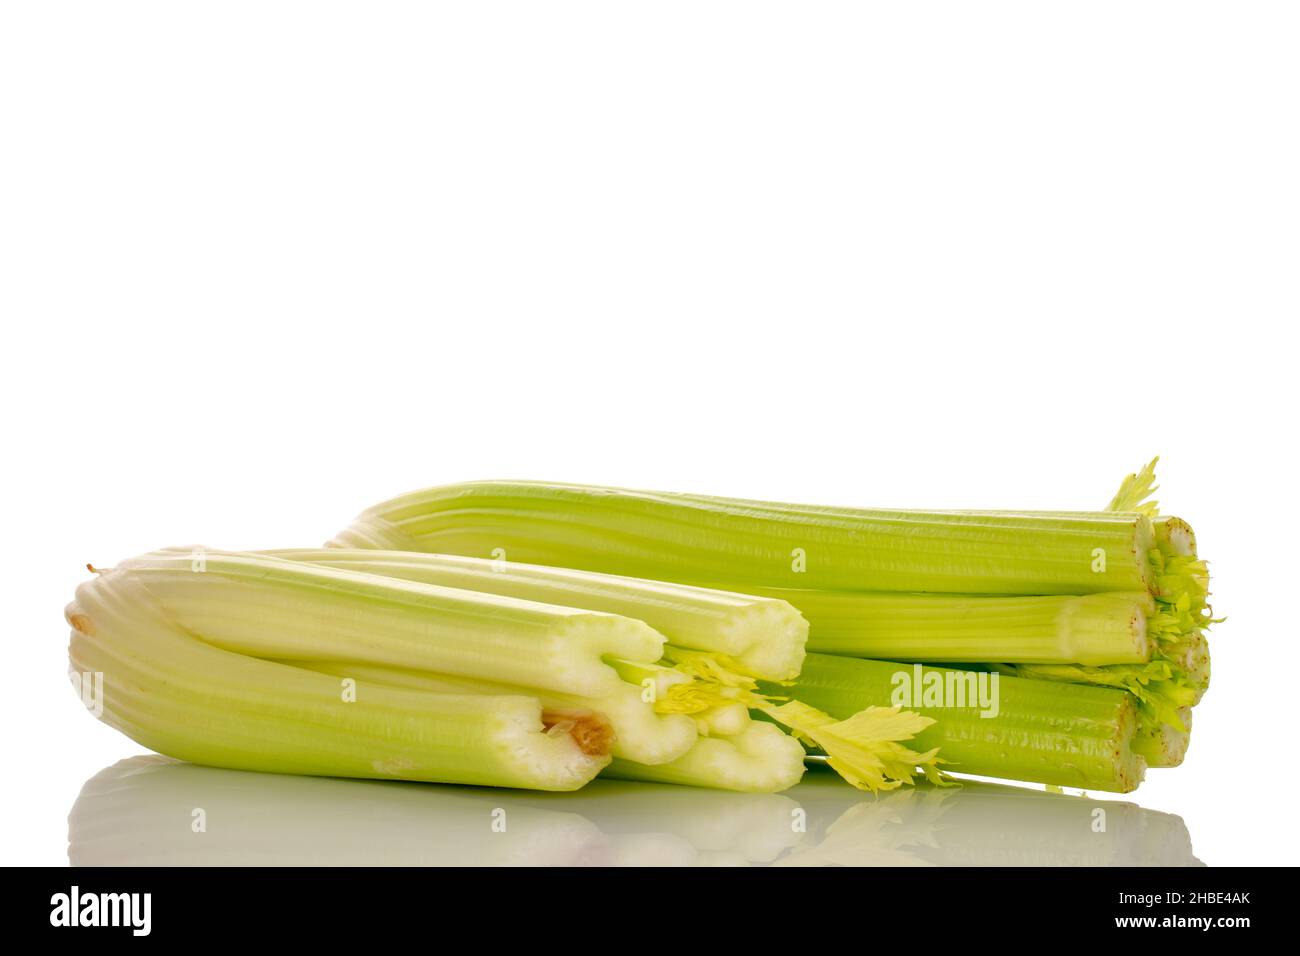 Two light green natural, juicy stalks of celery, close-up, isolated on white. Stock Photo